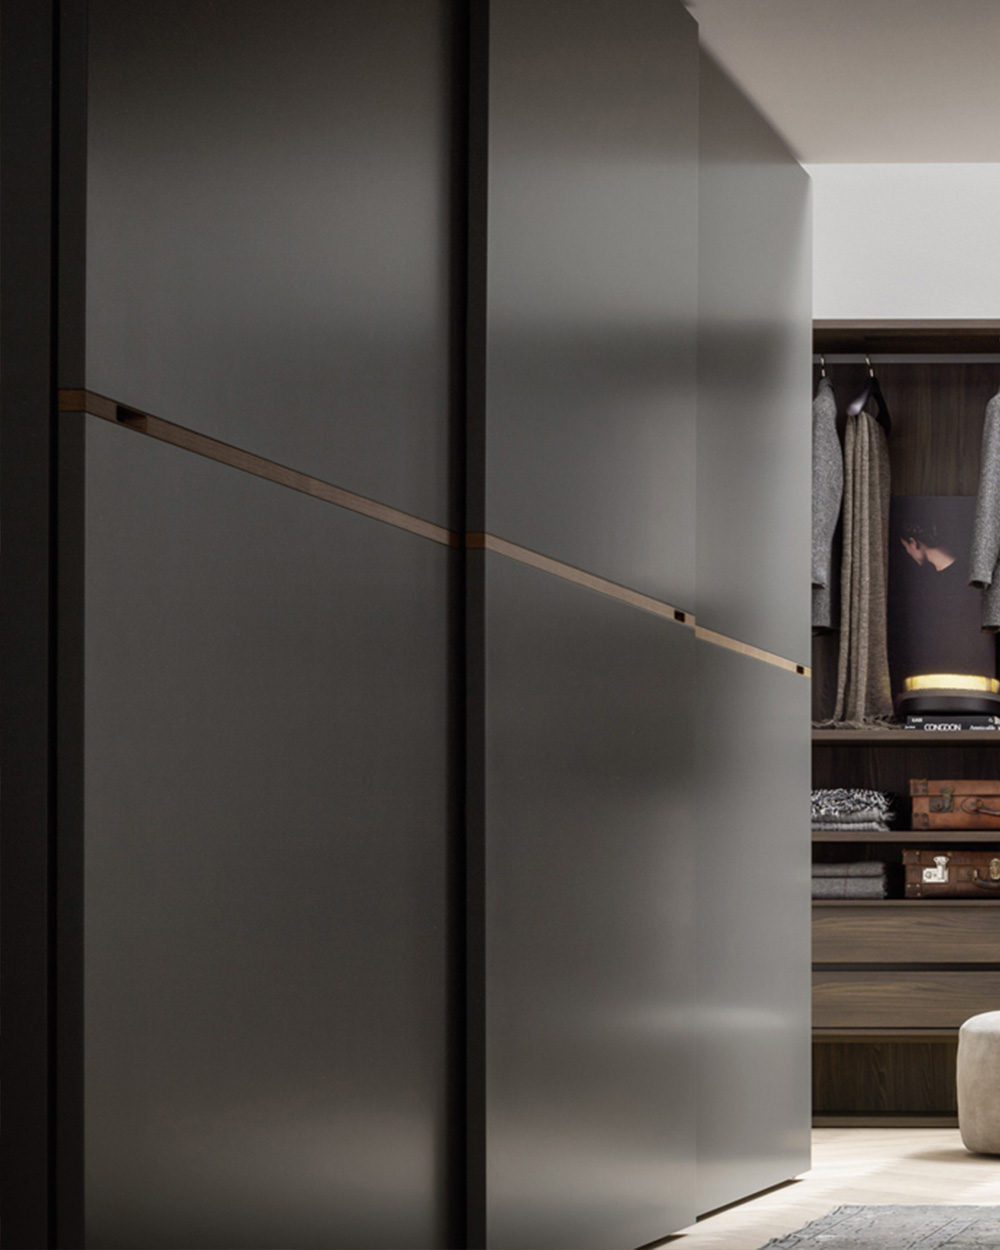 Luxury, minimal sliding wardrobe with central wooden insert. Italian wardrobes, designed and fitted by Krieder.